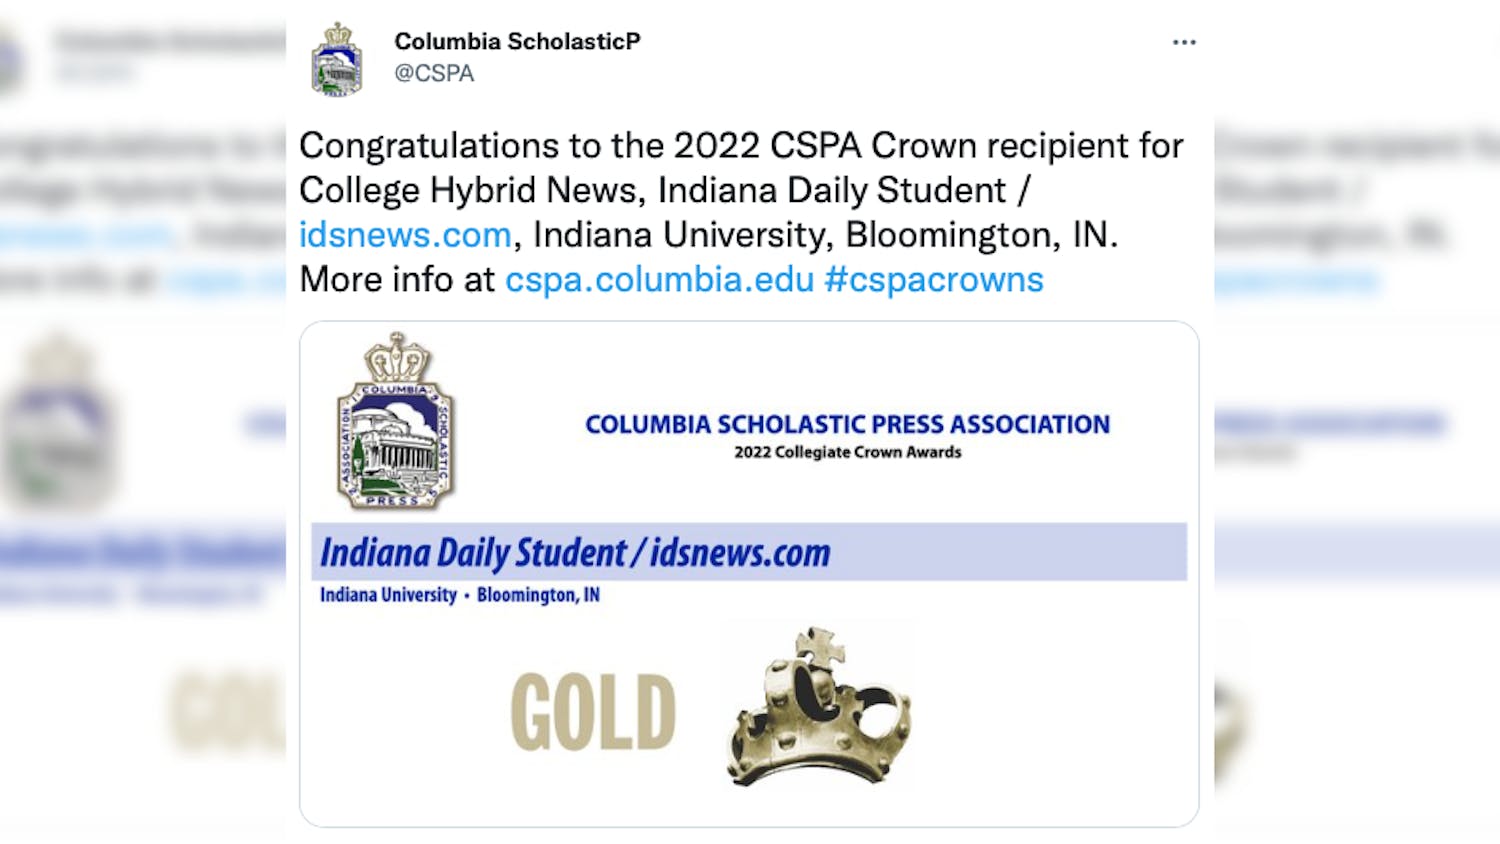 The IDS was one of three publications this year to win a Gold Crown from the Columbia Scholastic Press Association in the Hybrid News category.